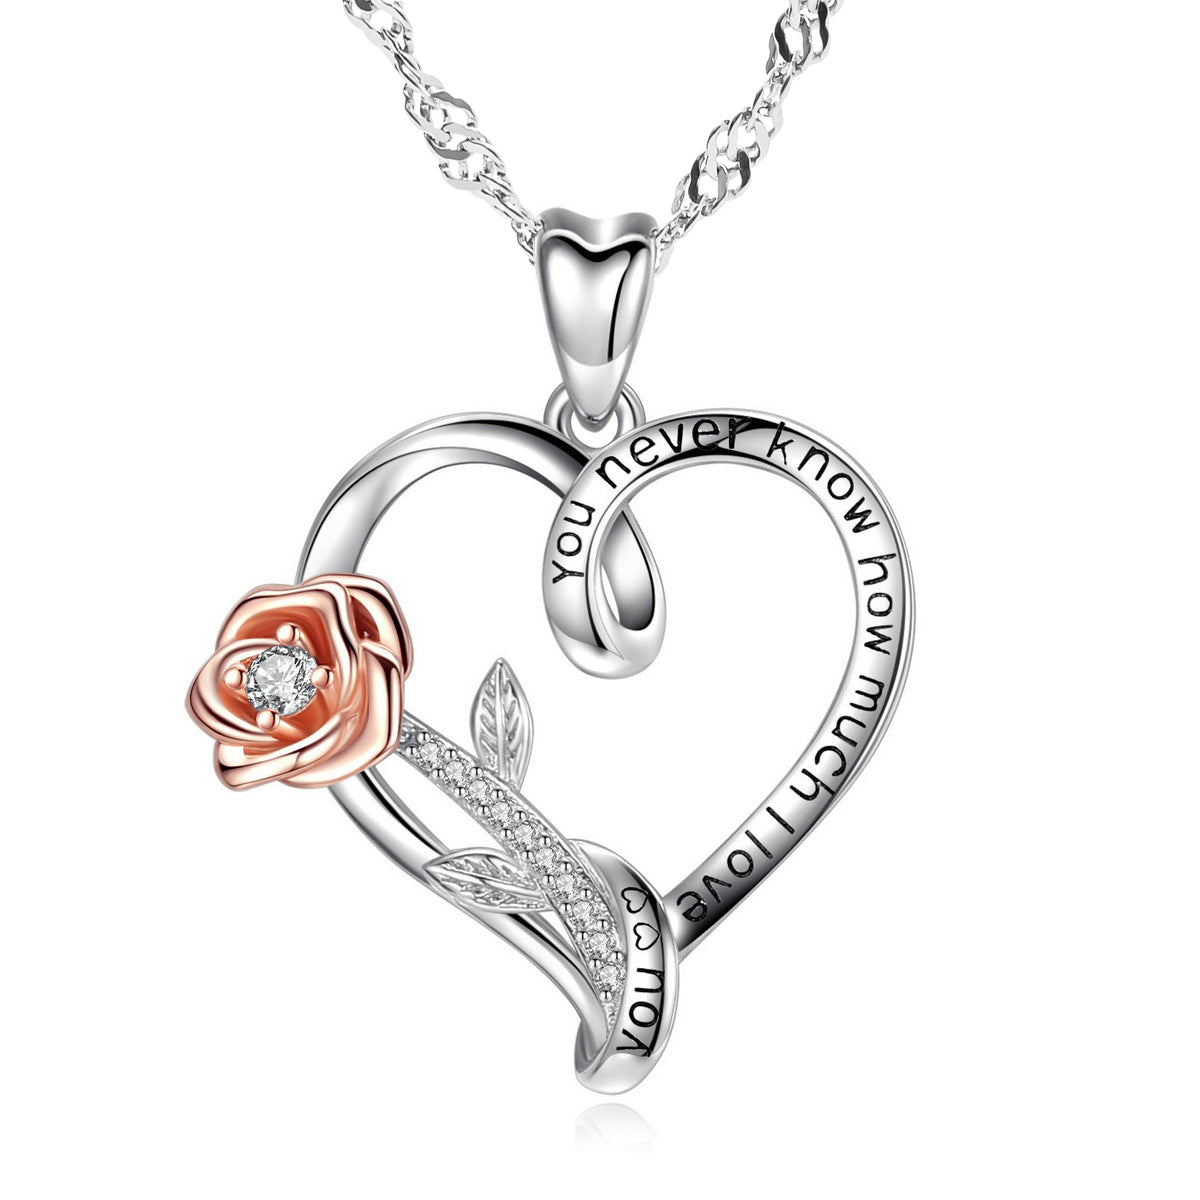 Rose Heart engraved pendant with 925 Sterling Silver Water Wave necklace chain 18"